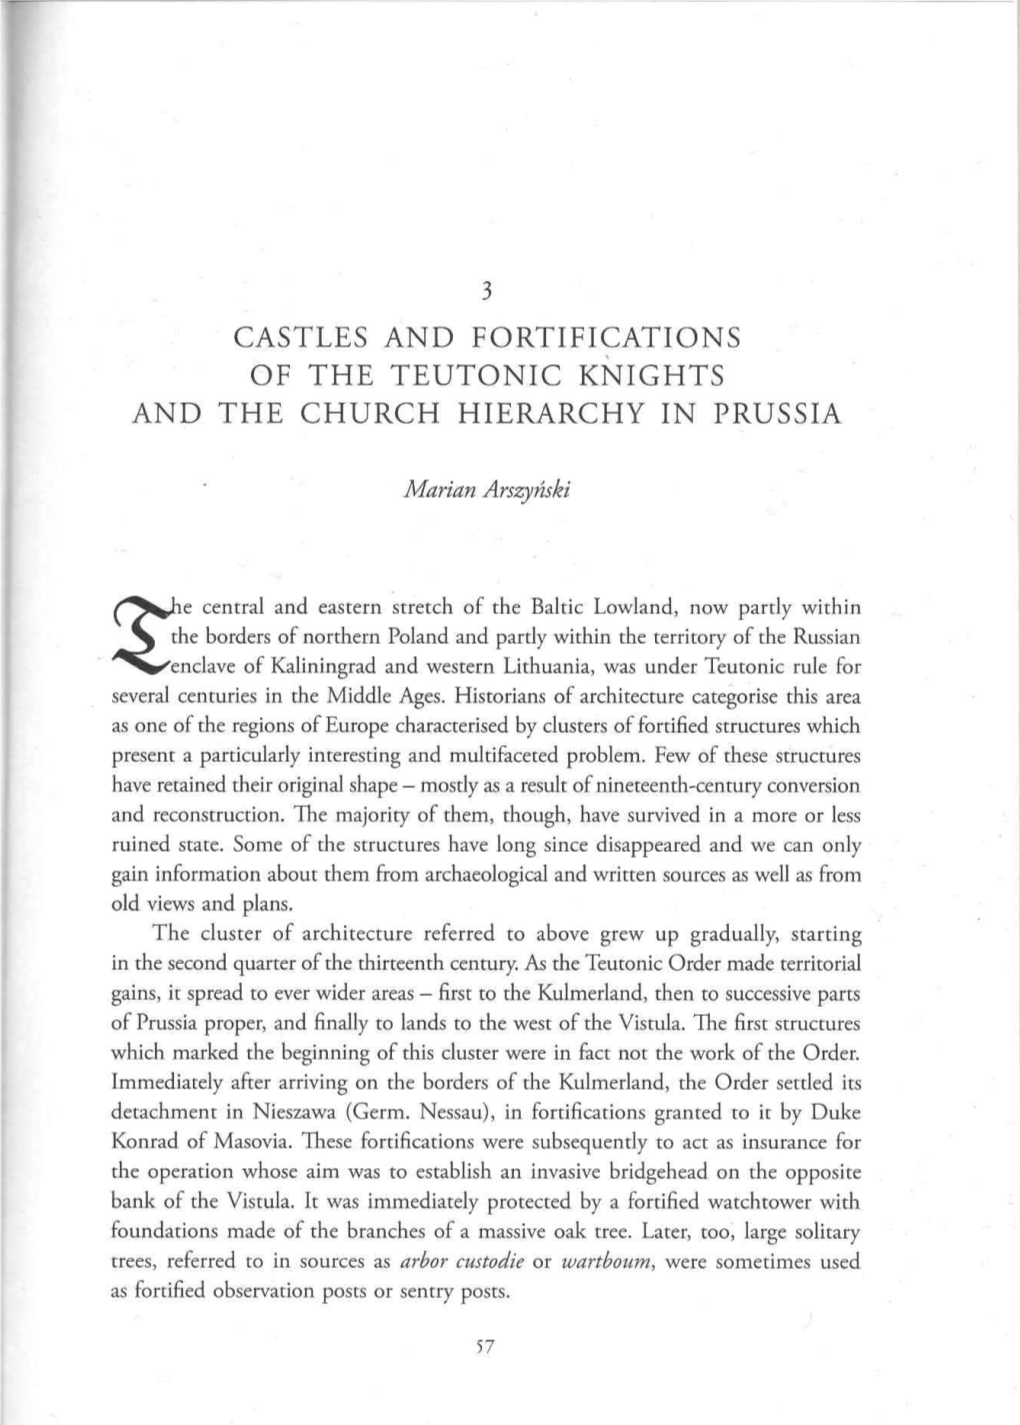 Castles and Fortifications of the Teutonic Knights and the Church Hierarchy in Prussia